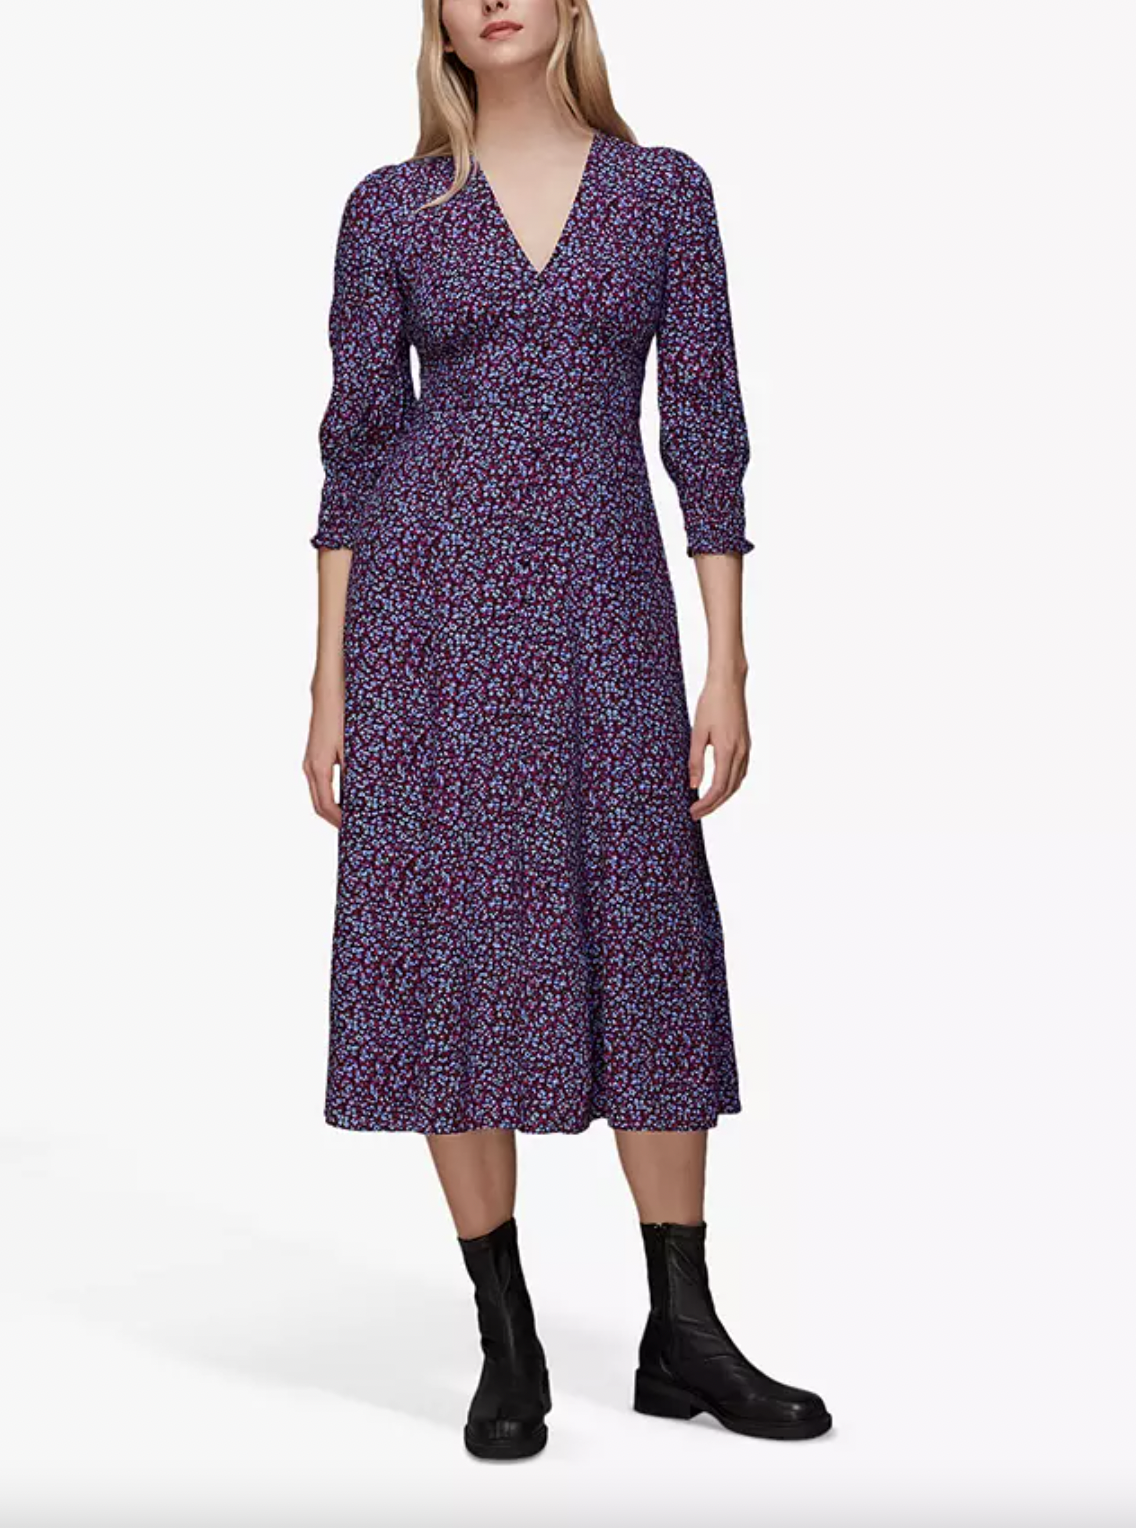 John Lewis sale: 20 dresses with up to 50% off